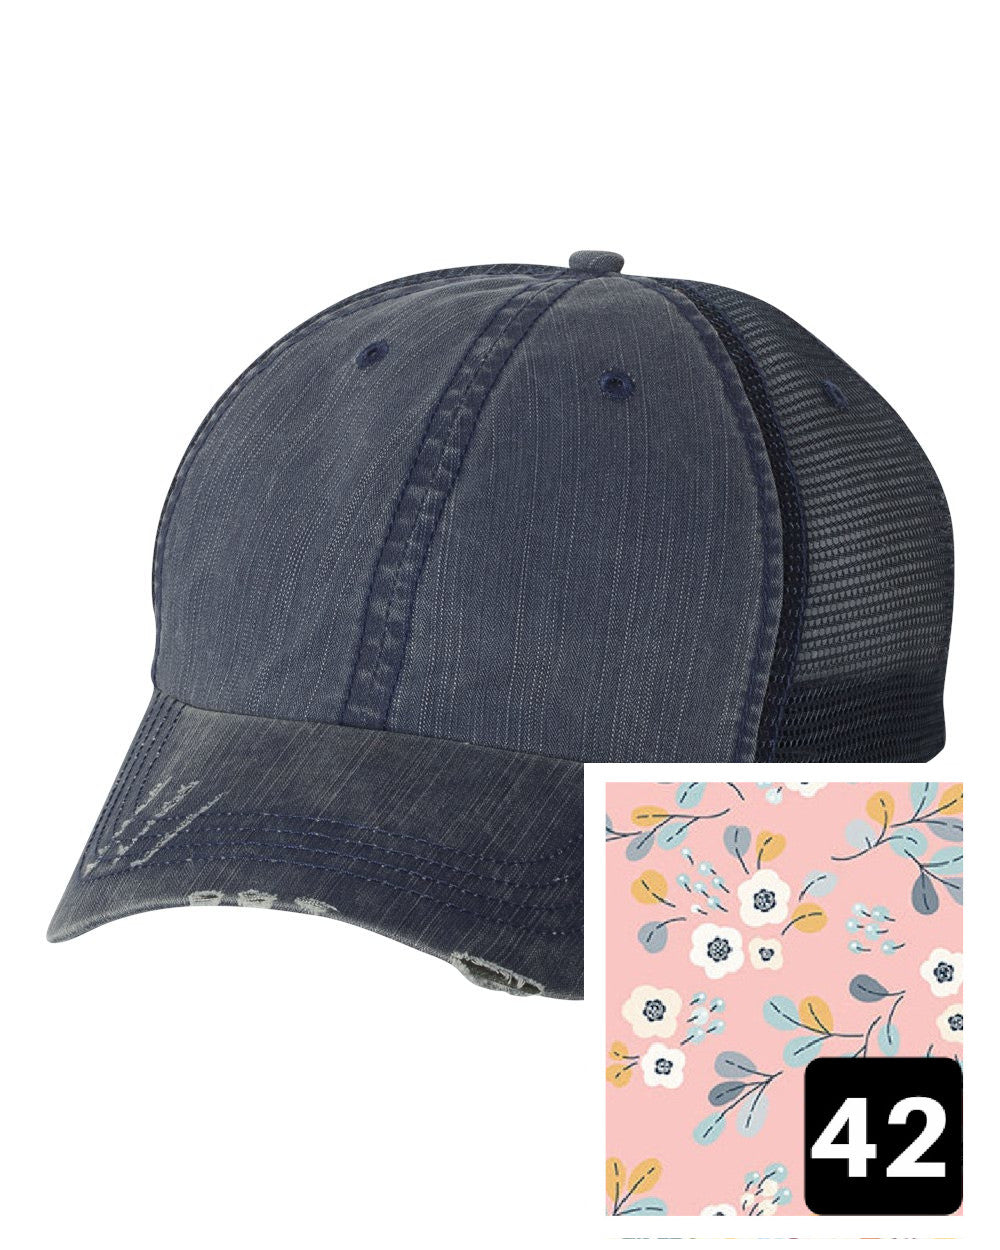 Virginia Hat | Navy Distressed Trucker Cap | Many Fabric Choices